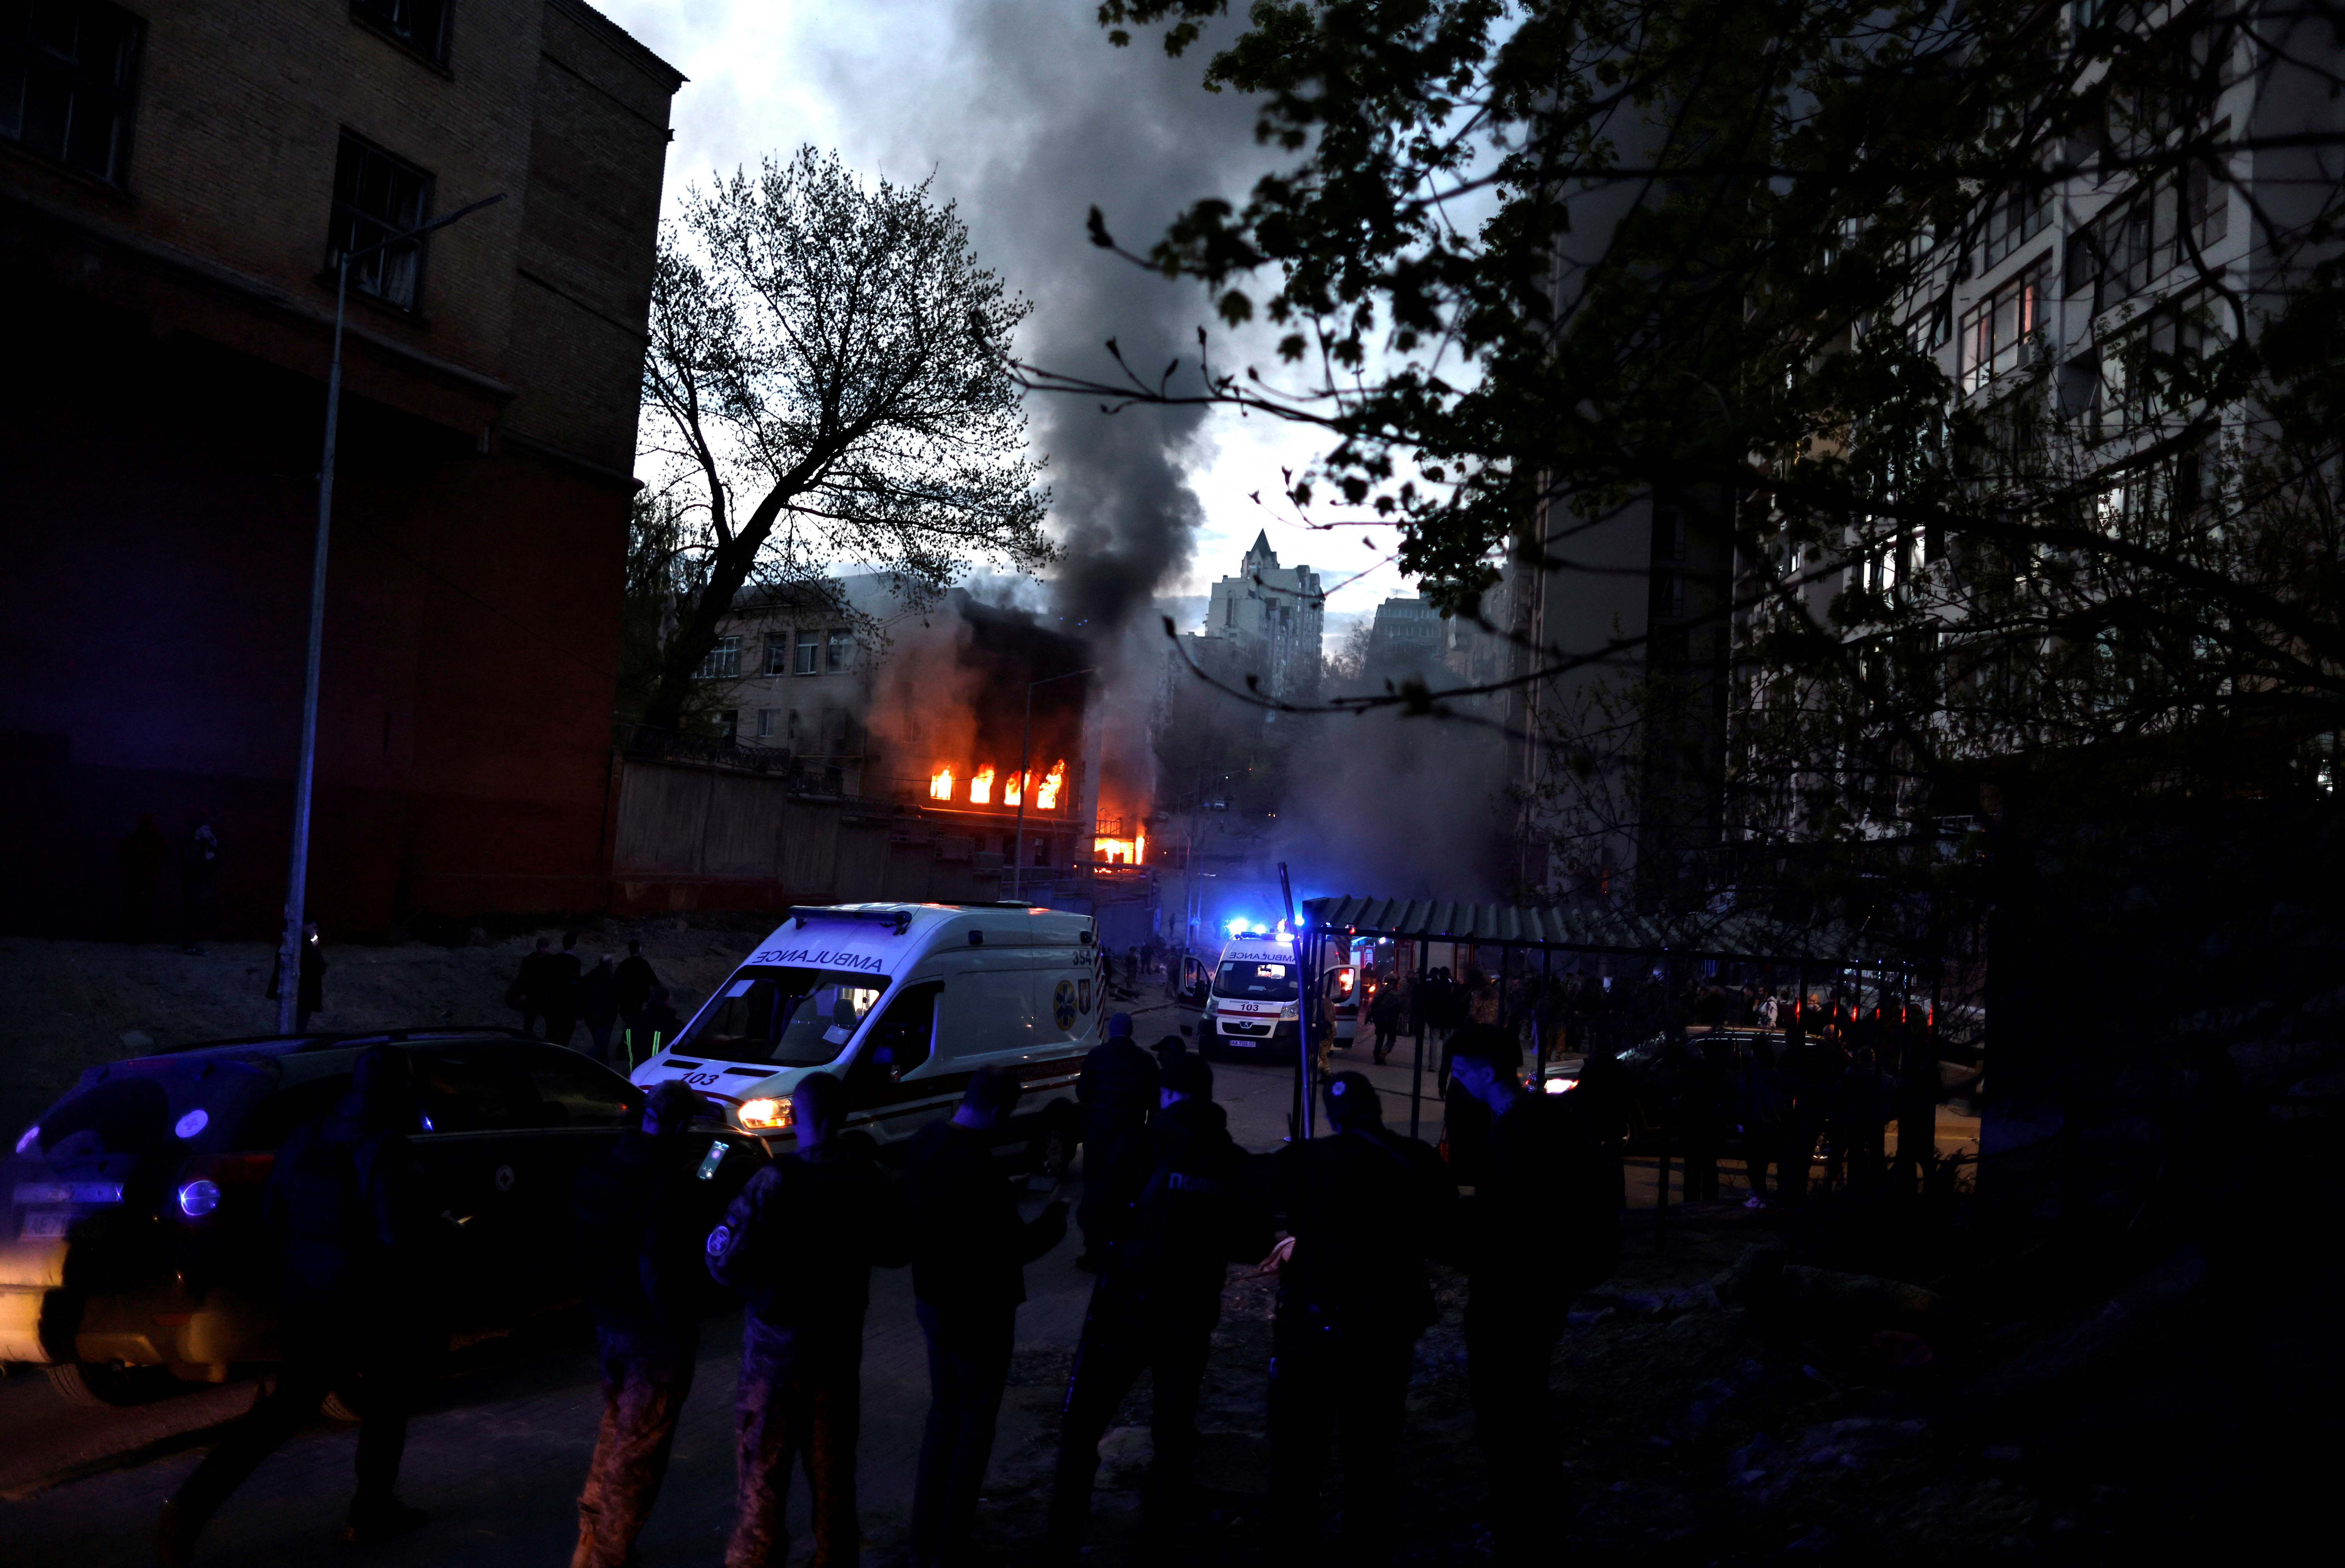 Fire burns in a building after a shelling, amid Russia's invasion of Ukraine, in Kyiv